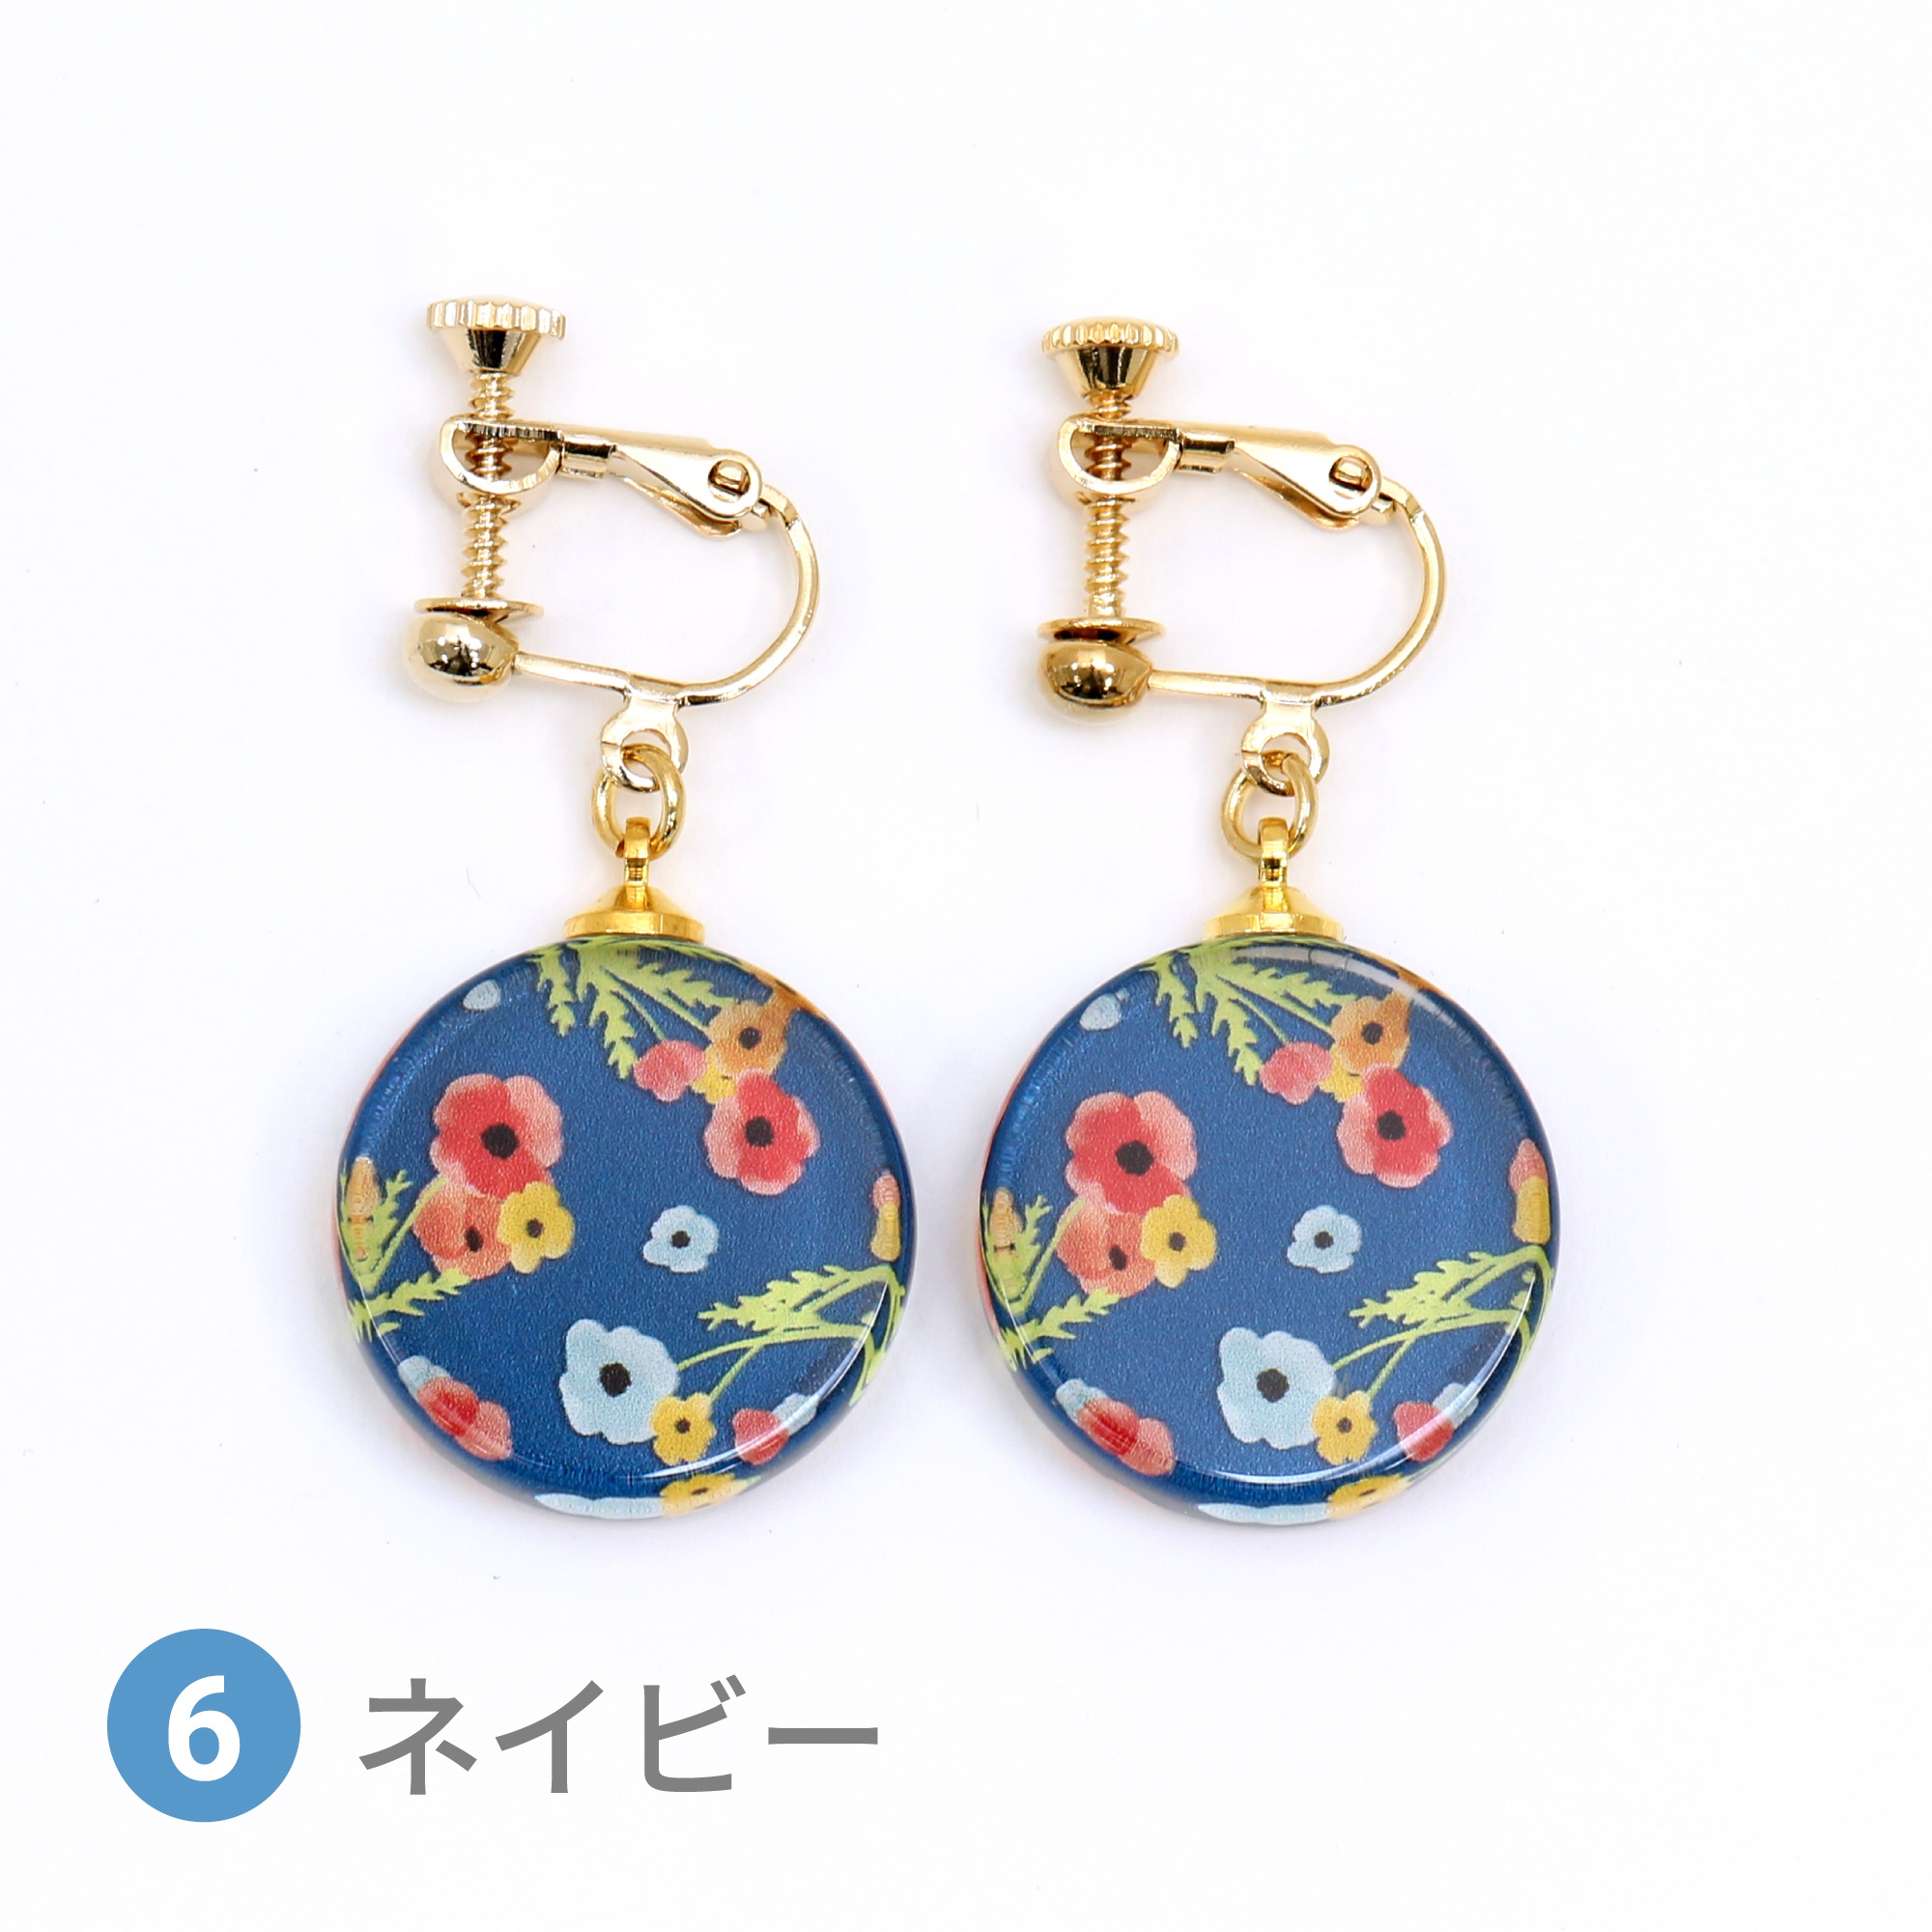 Glass accessories Earring POPPY navy round shape